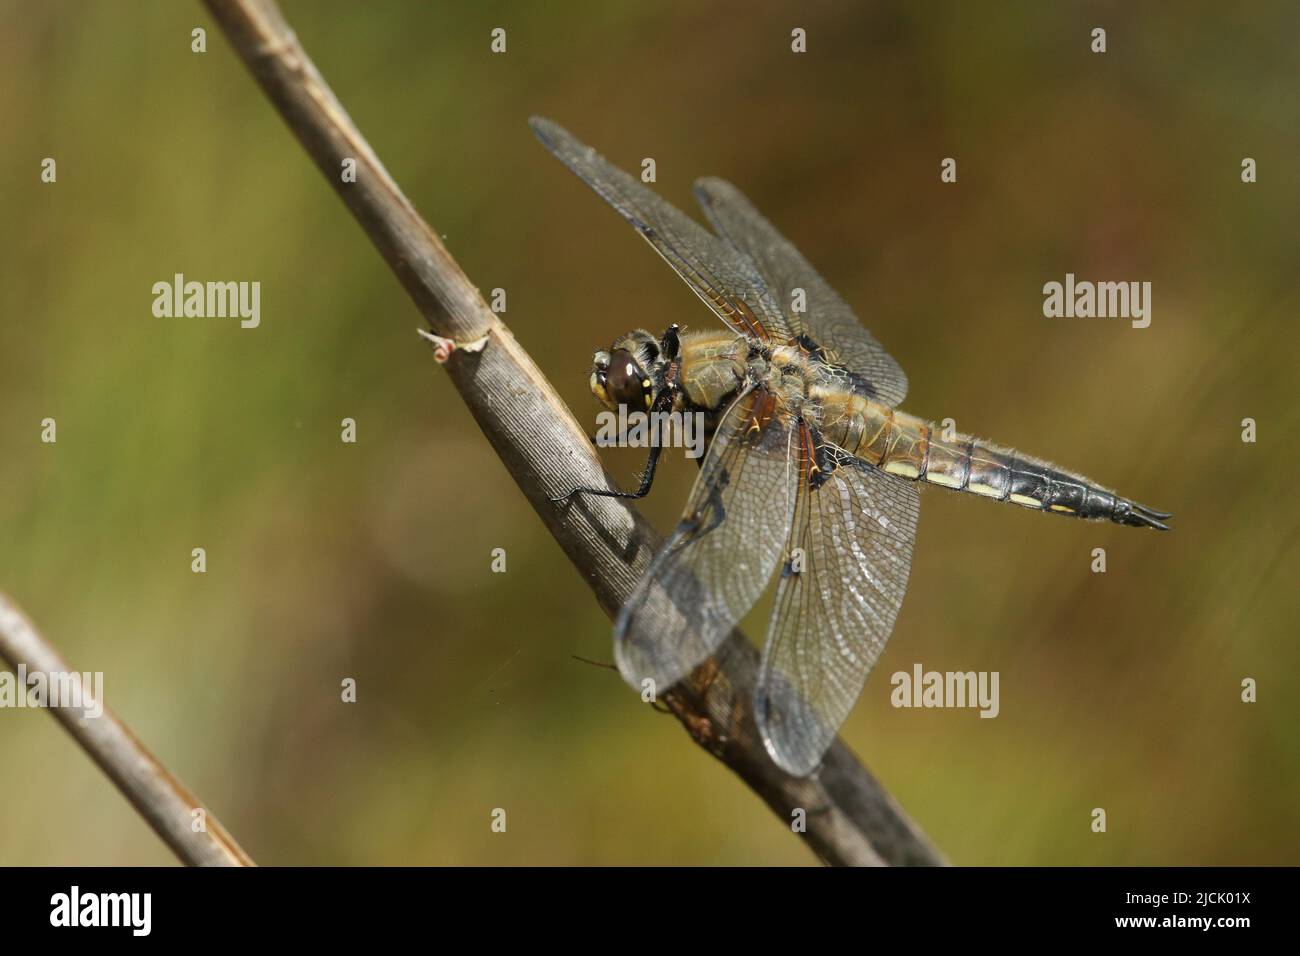 A hunting Four-spotted Chaser Dragonfly, Libellula quadrimaculata, perched on a reed growing at the edge of a pond. Stock Photo